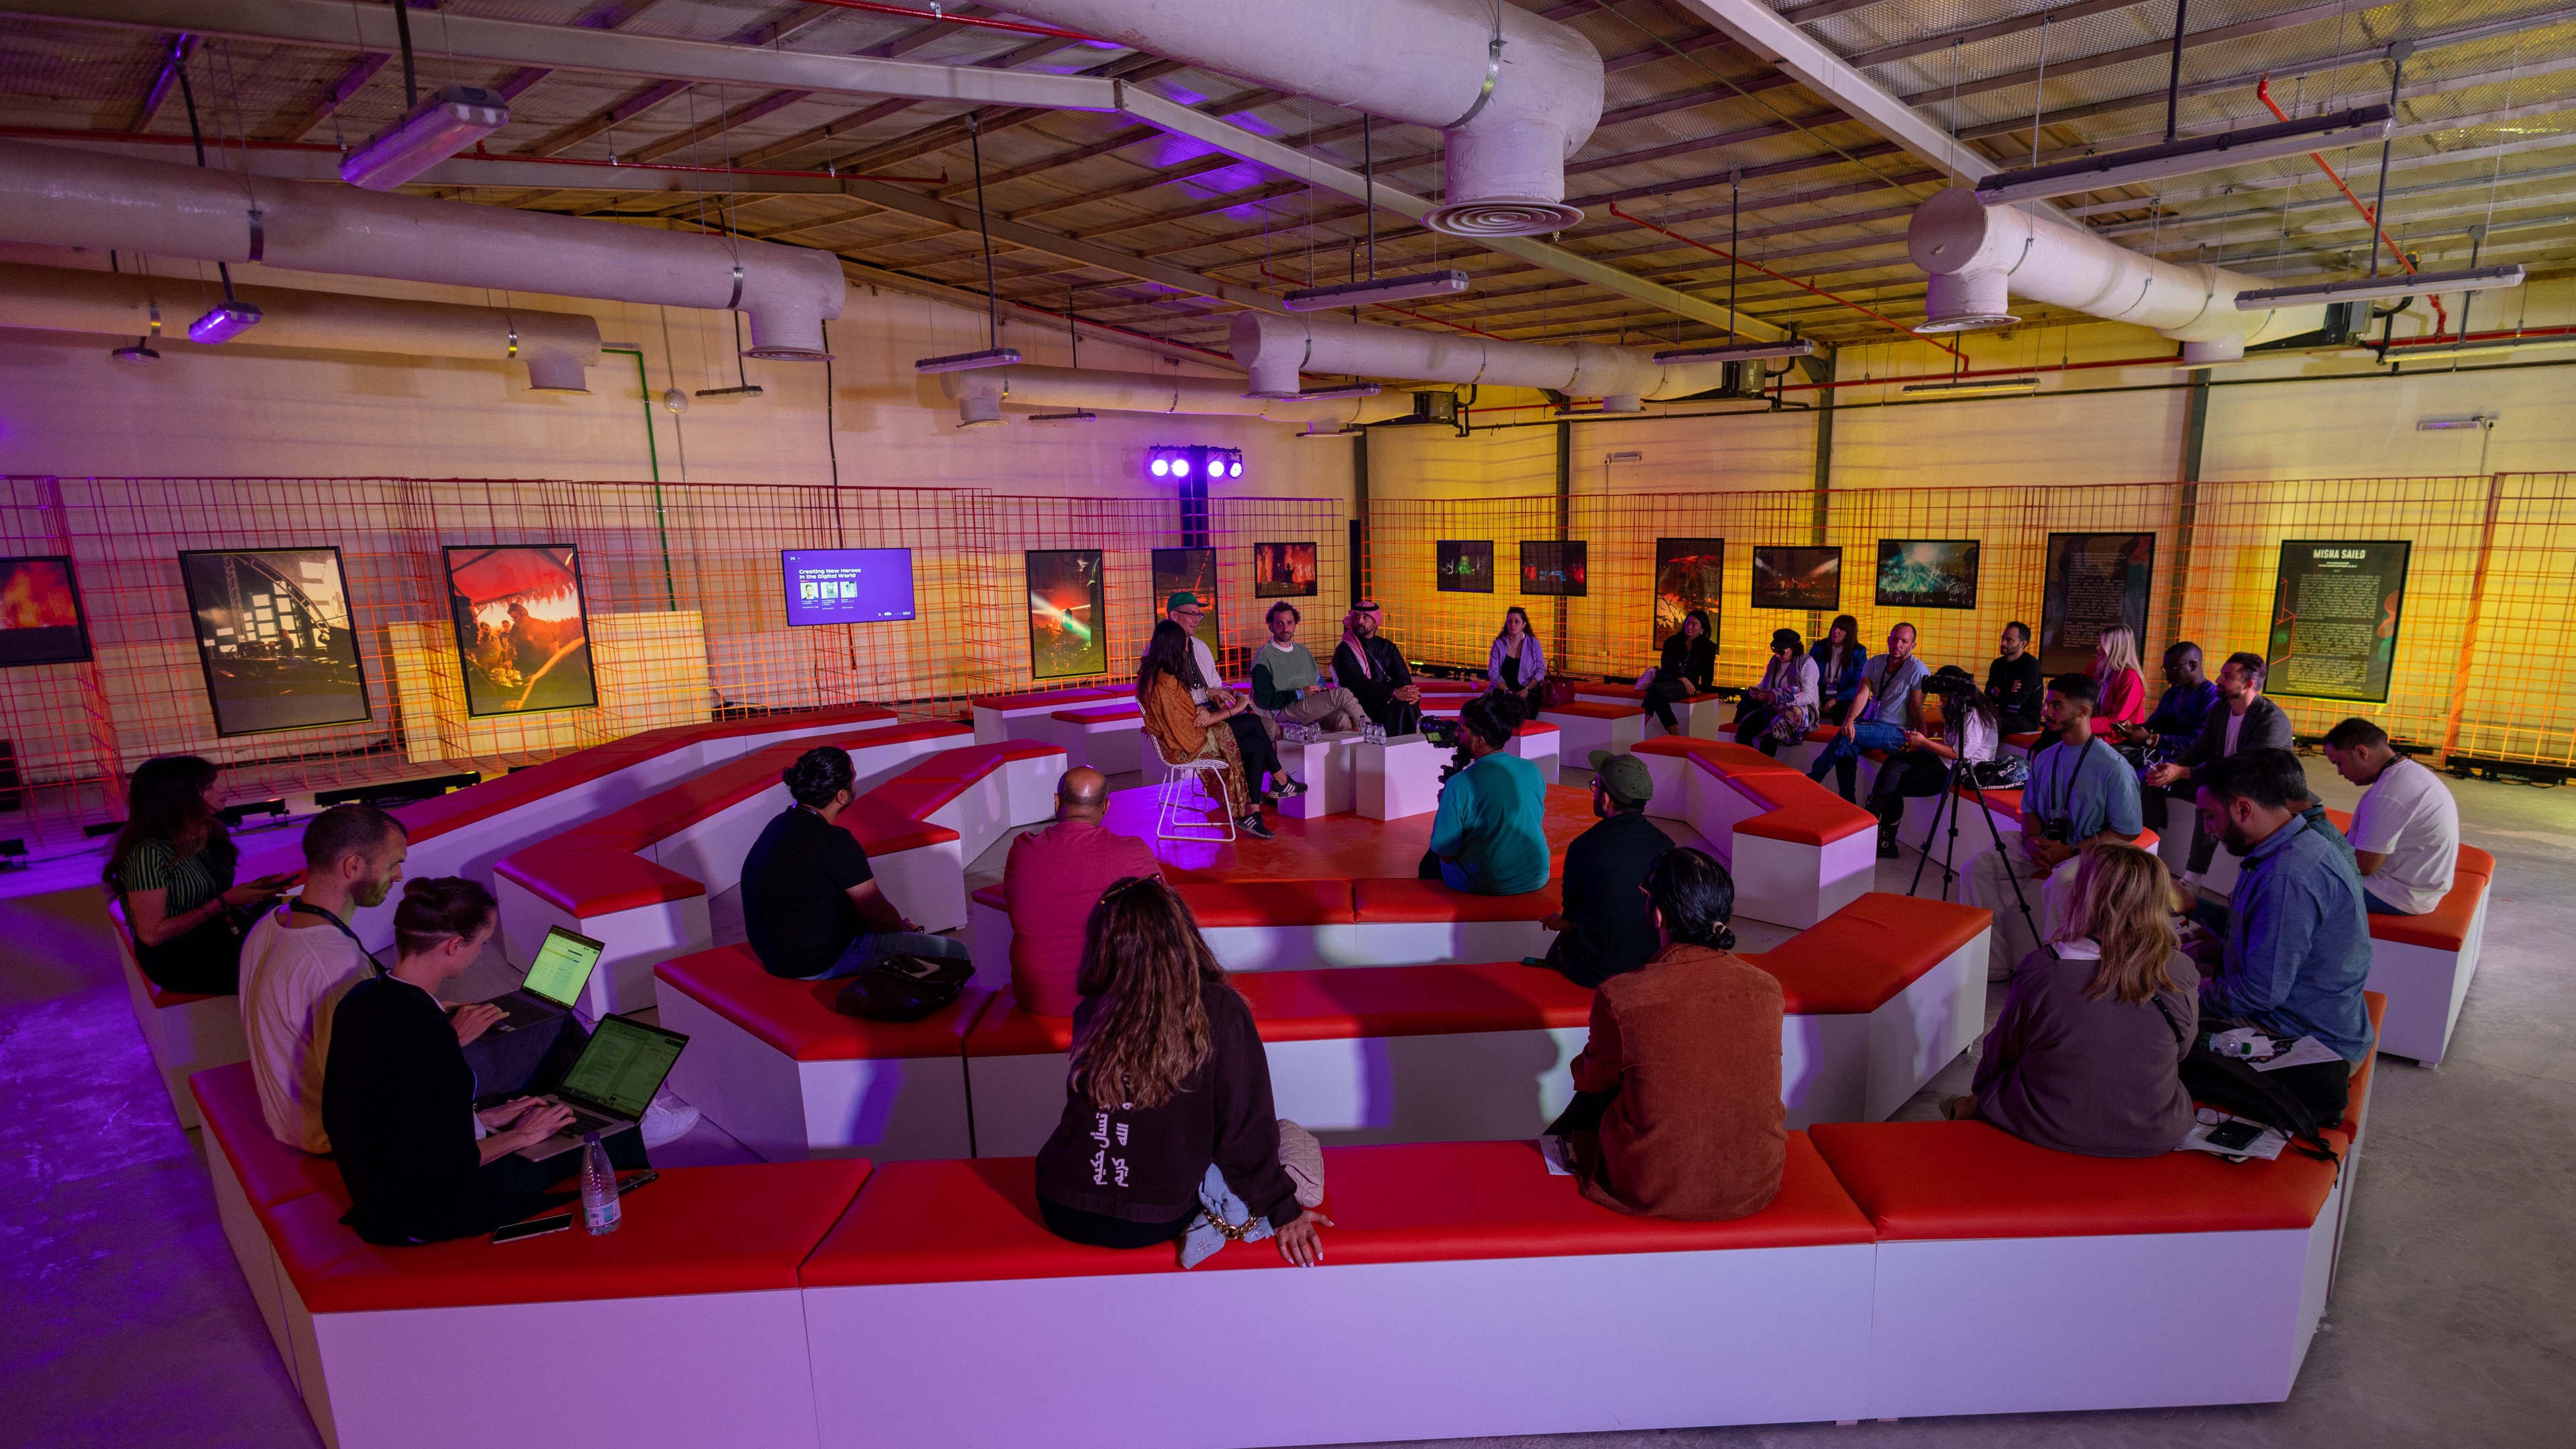 Conference attendees sit in a circular pattern in an industrial style room